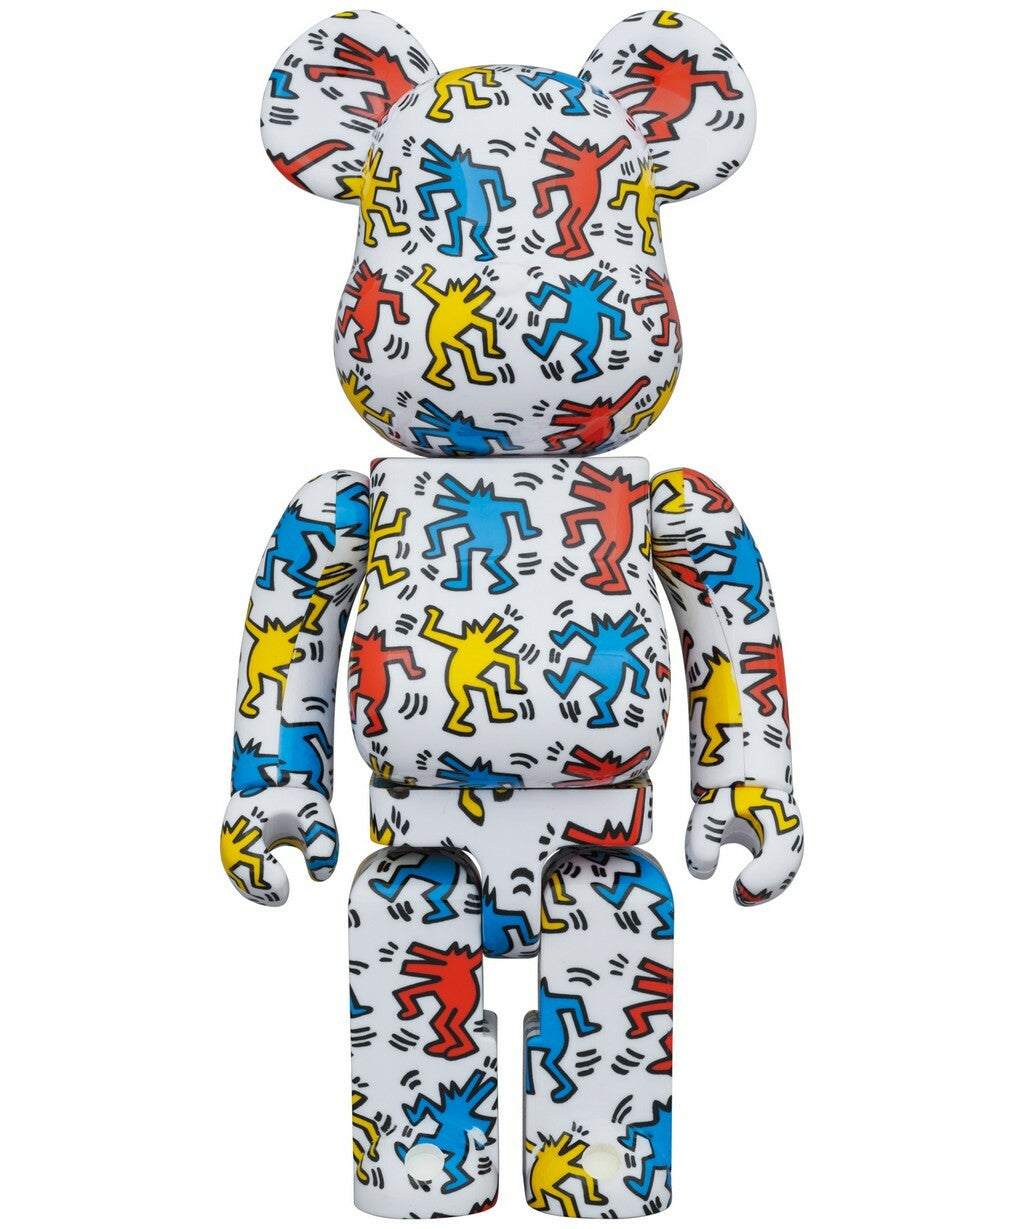 Keith Haring: BE@RBRICK v9 (Dancing Dogs) 100% & 400% Figure set - Art Toy, be@rbrick, dancing dogs, exceptional collecting, Keith Haring, limited edition, new arrival, New Arrivals - Gadgetz Home